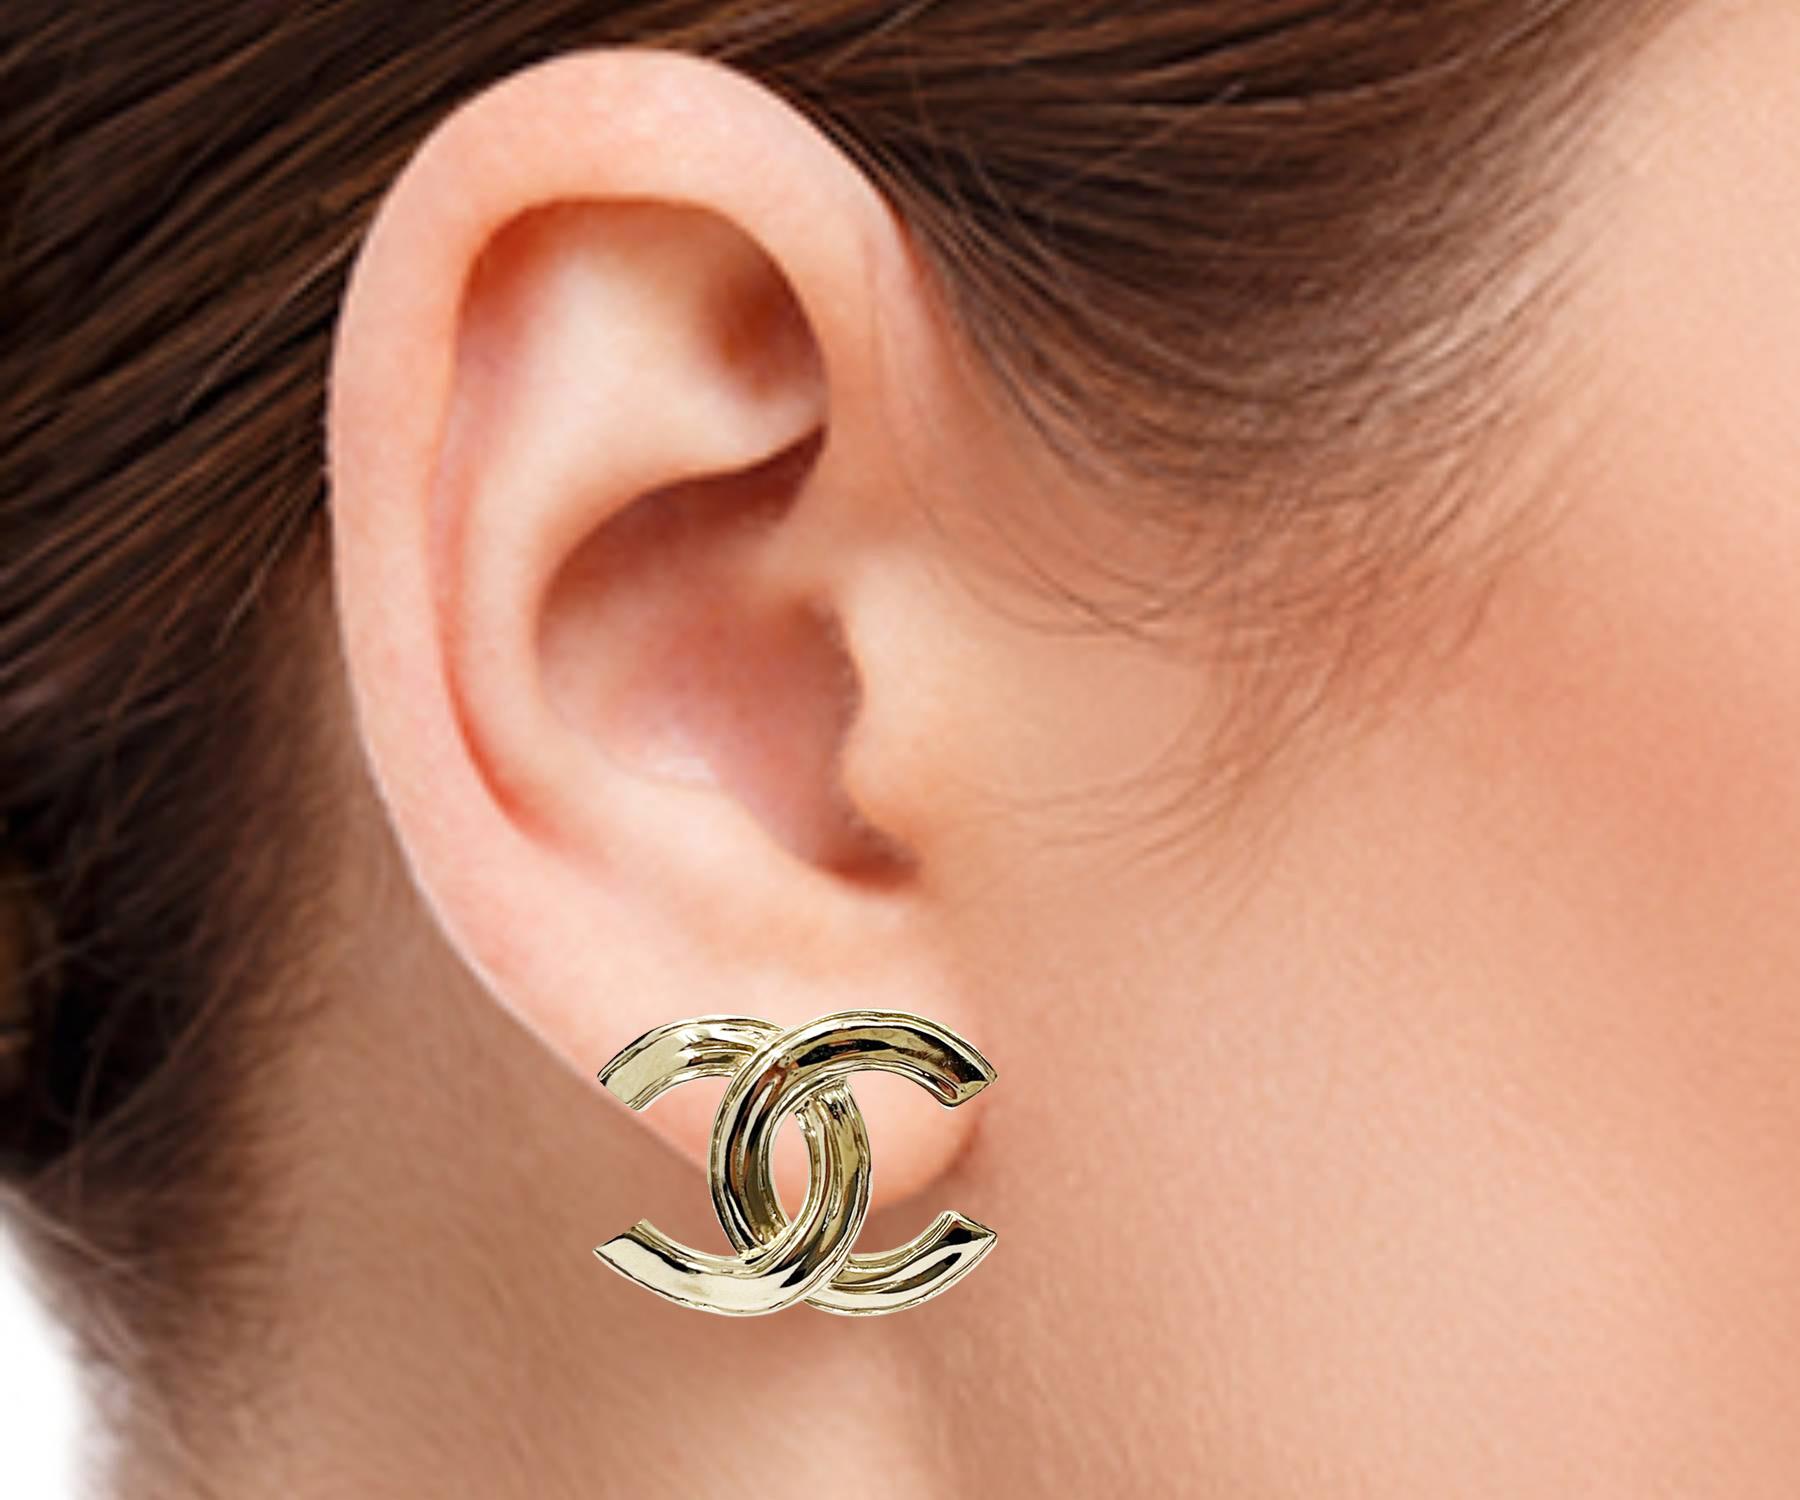 Chanel Brand New Light Gold Textured CC Large Piercing Earrings In Excellent Condition For Sale In Pasadena, CA